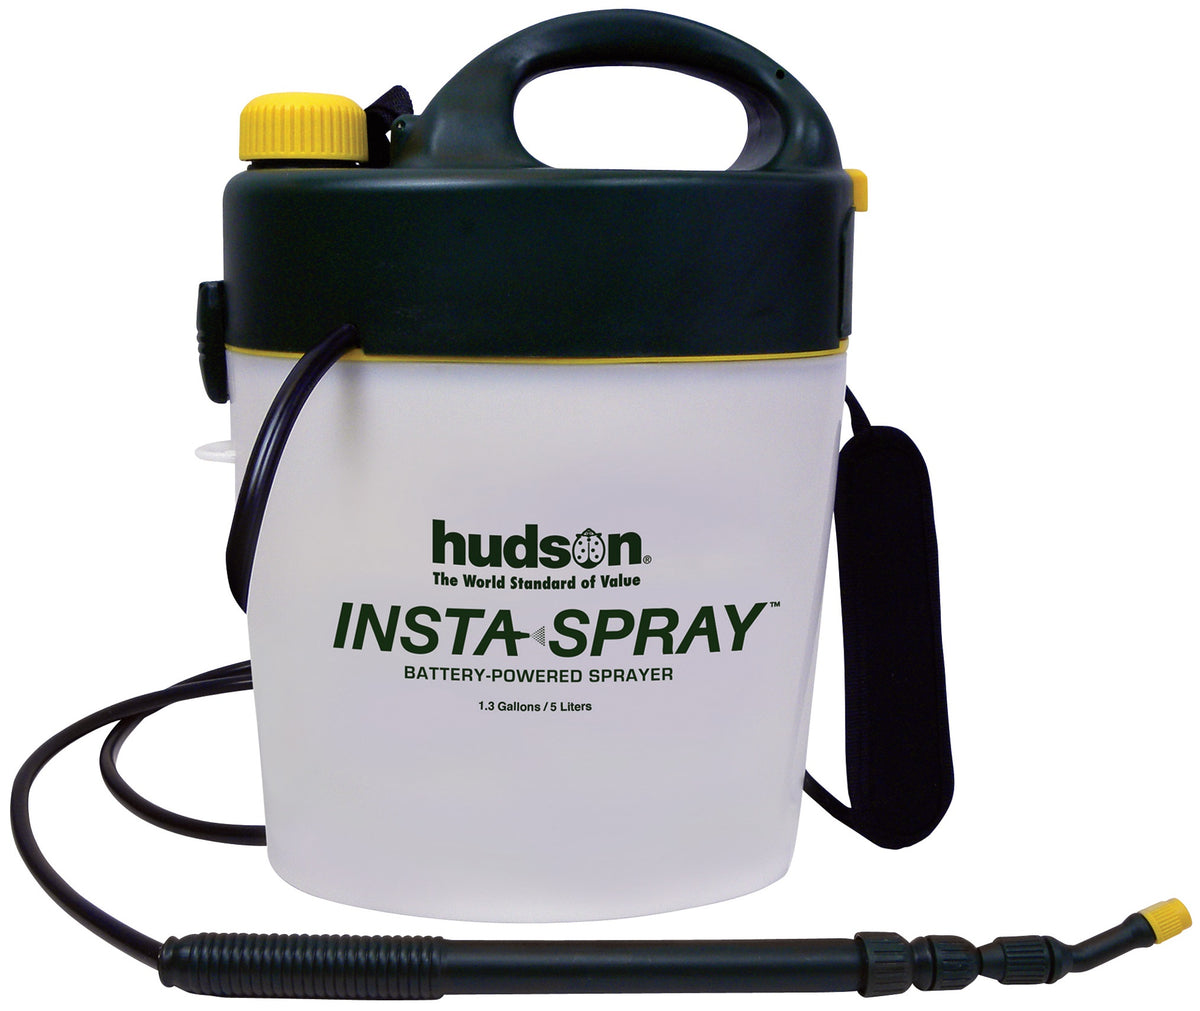 buy sprayers at cheap rate in bulk. wholesale & retail lawn & plant care sprayers store.